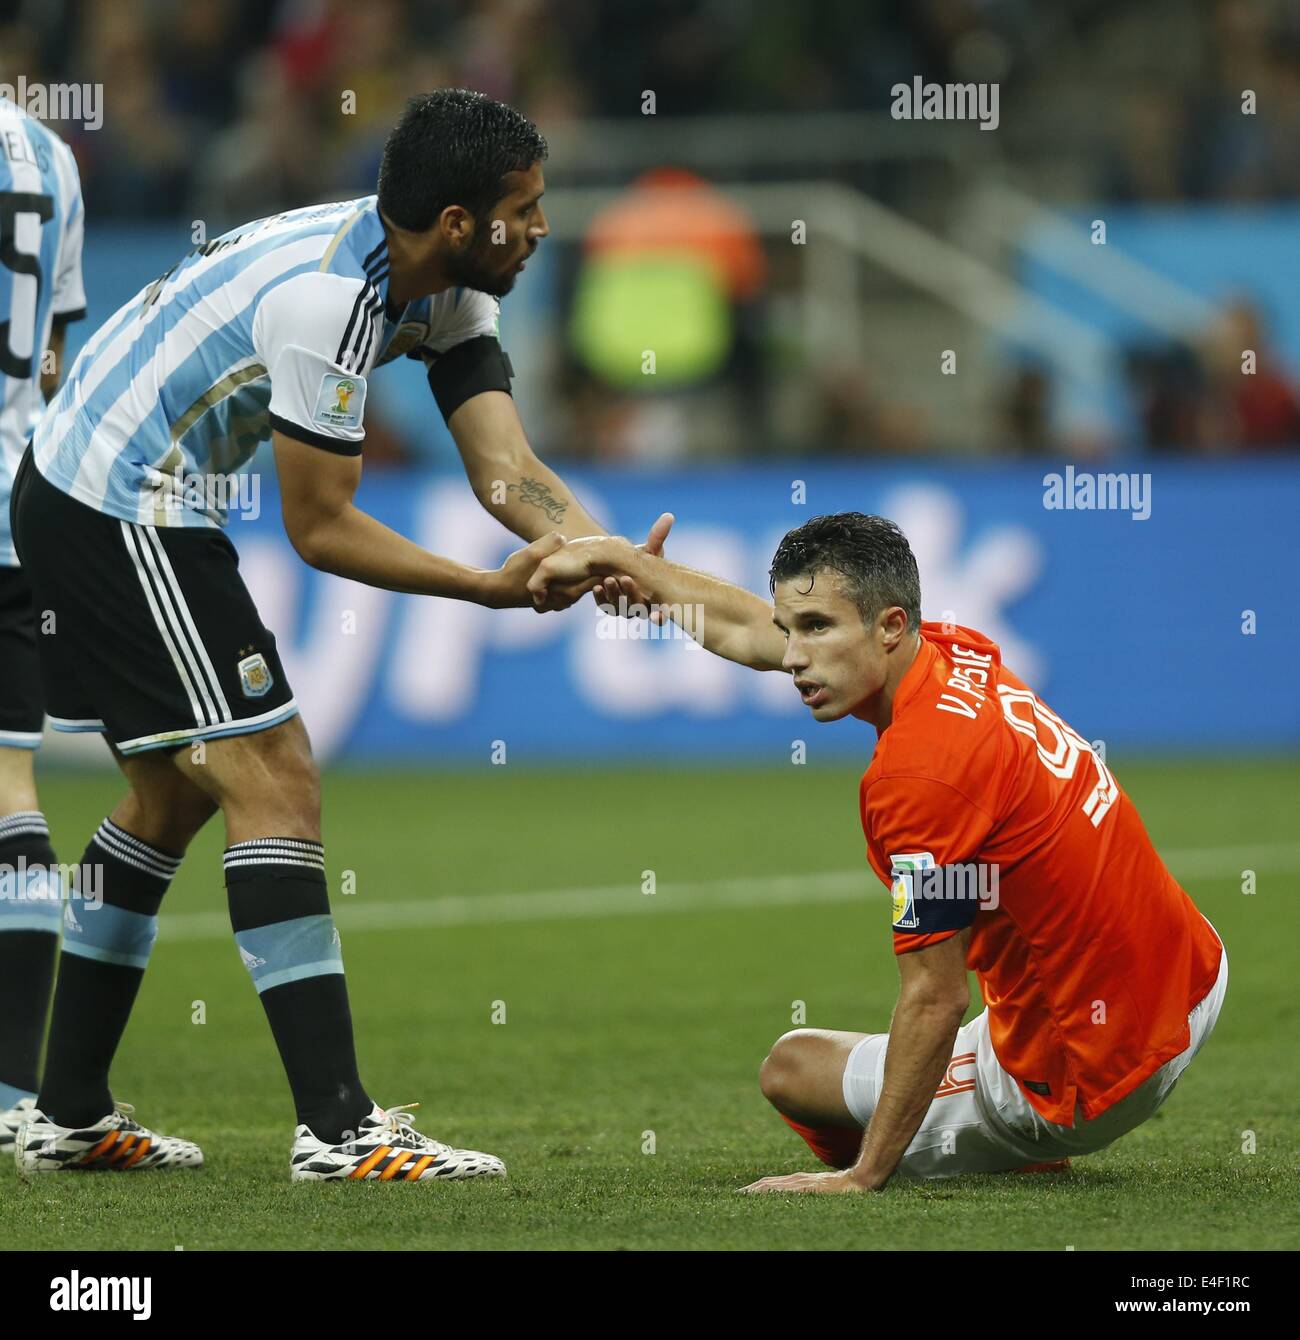 Sao Paulo, Brazil. 9th July, 2014. Argentina's Ezequiel Garay (L) pulls up Netherlands' Robin van Persie during a semifinal match between Netherlands and Argentina of 2014 FIFA World Cup at the Arena de Sao Paulo Stadium in Sao Paulo, Brazil, on July 9, 2014. Credit:  Wang Lili/Xinhua/Alamy Live News Stock Photo